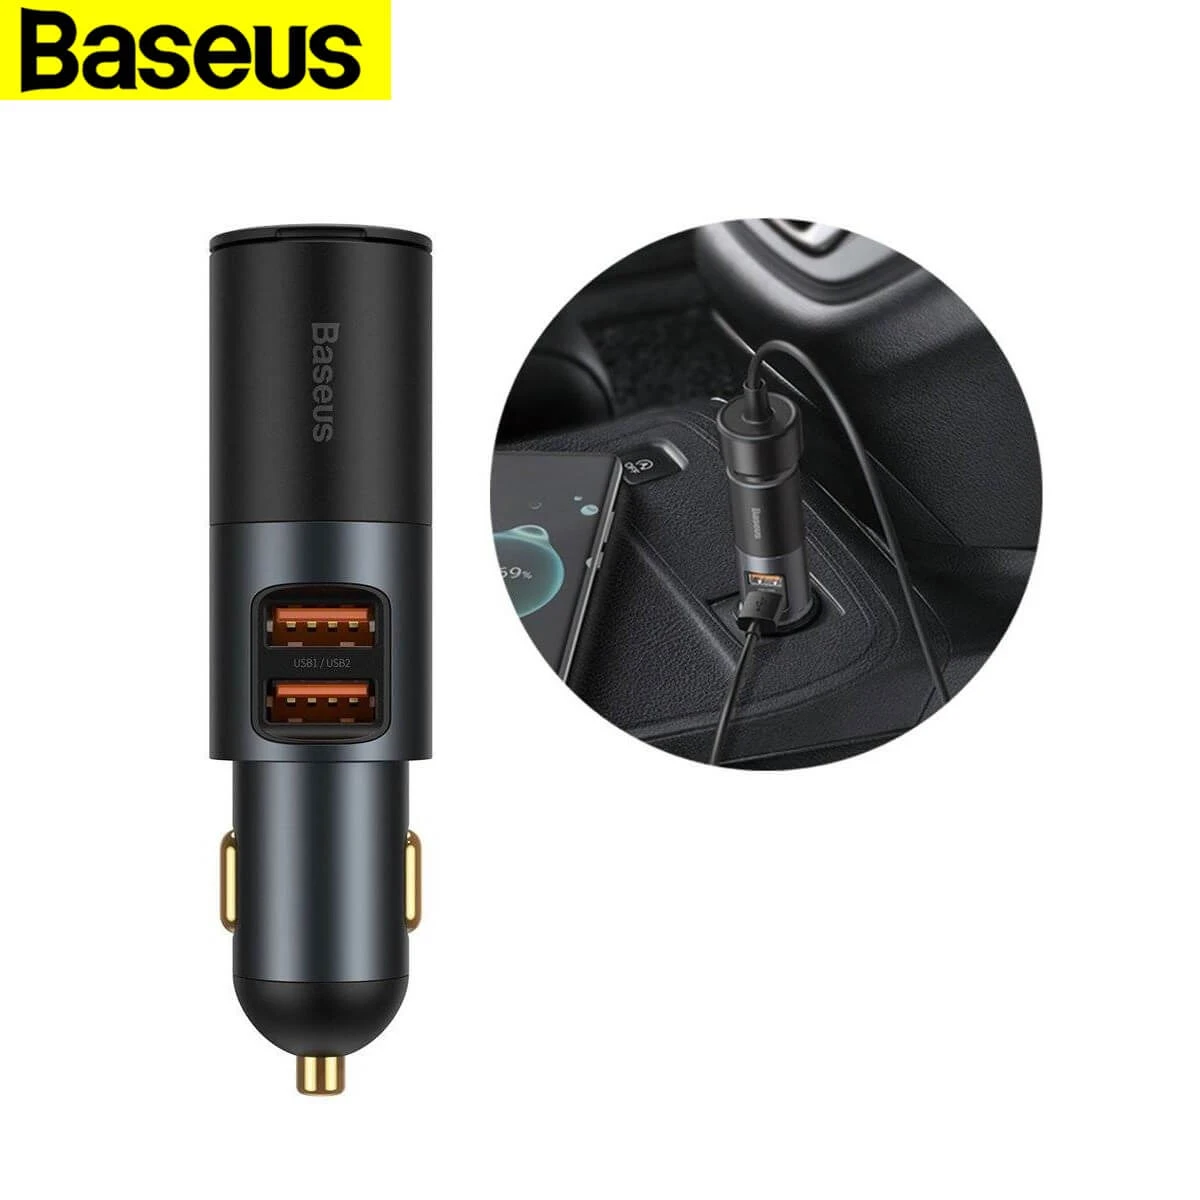 Baseus Share Together Quick Charge Car Charger with Cigarette Lighter U+C 120W